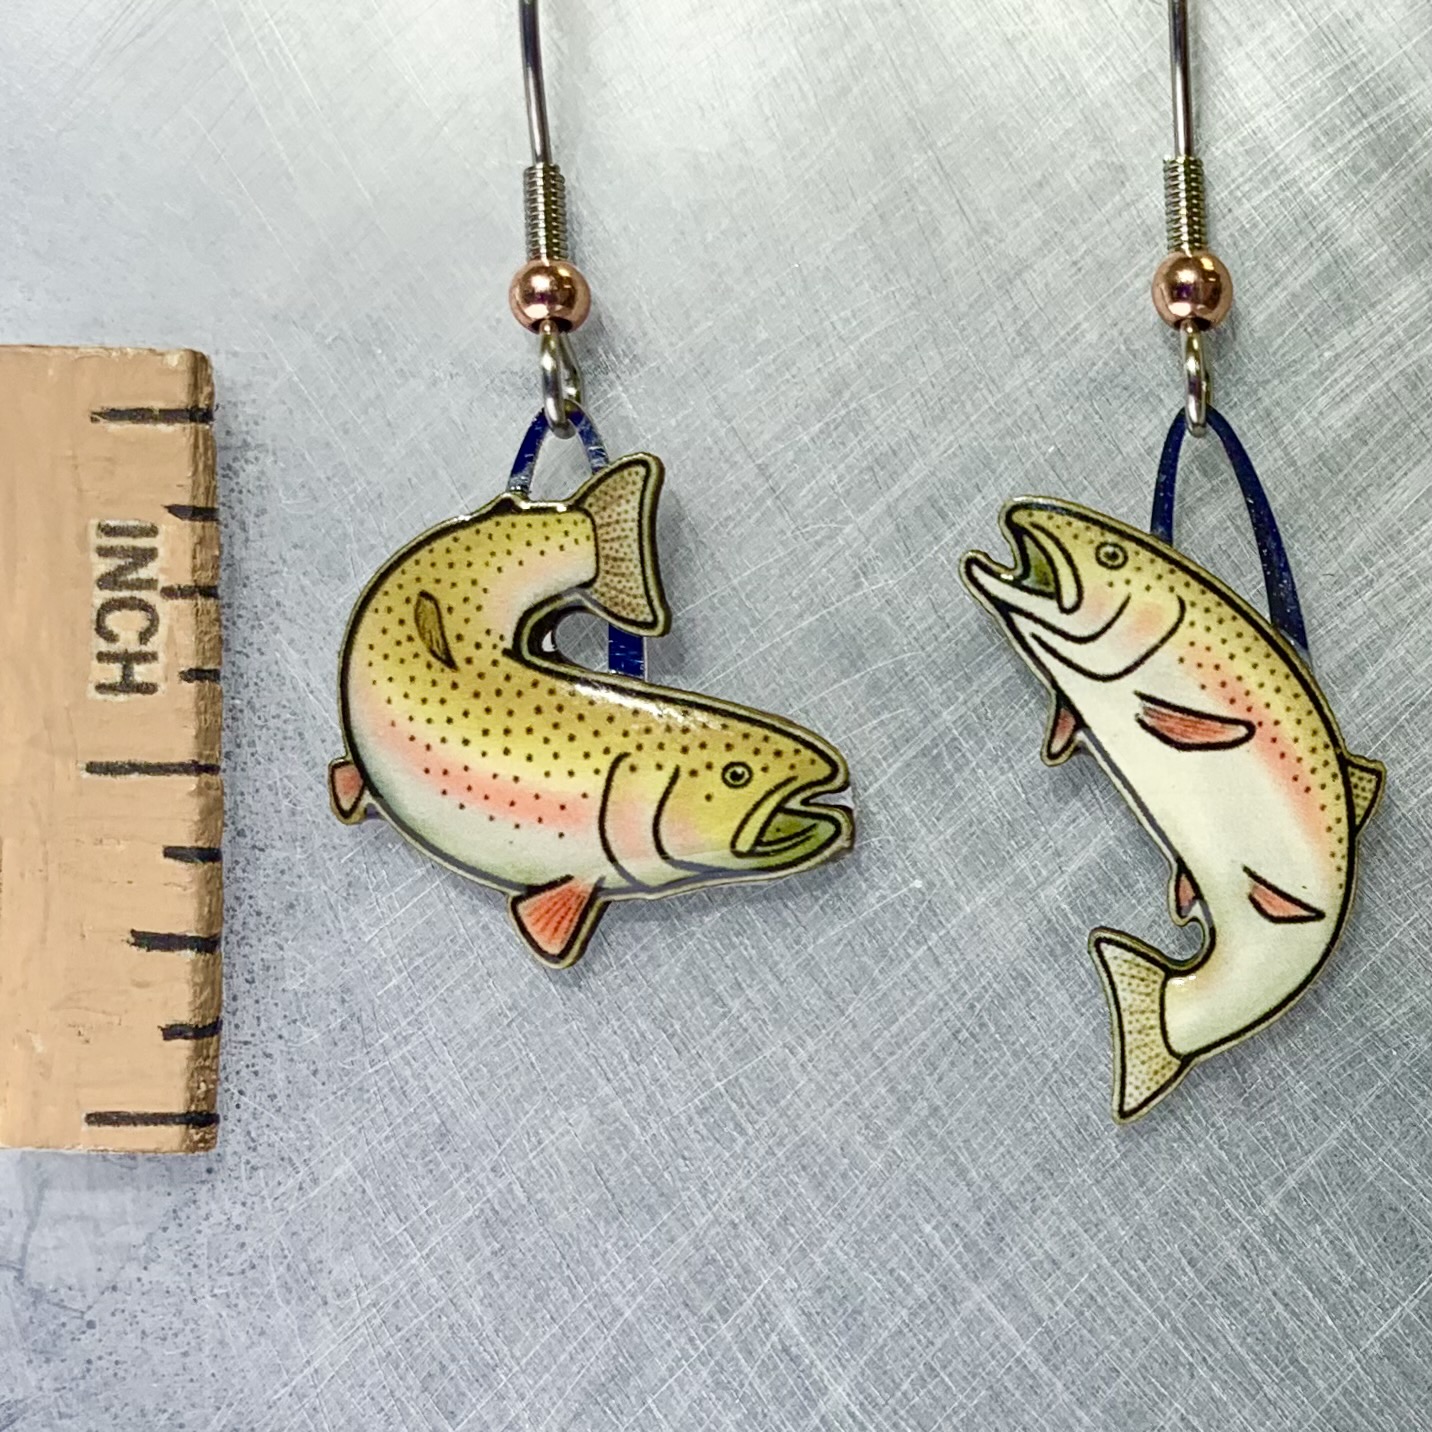 Picture shown is of 1 inch tall pair of earrings of the fish the Rainbow Trout.